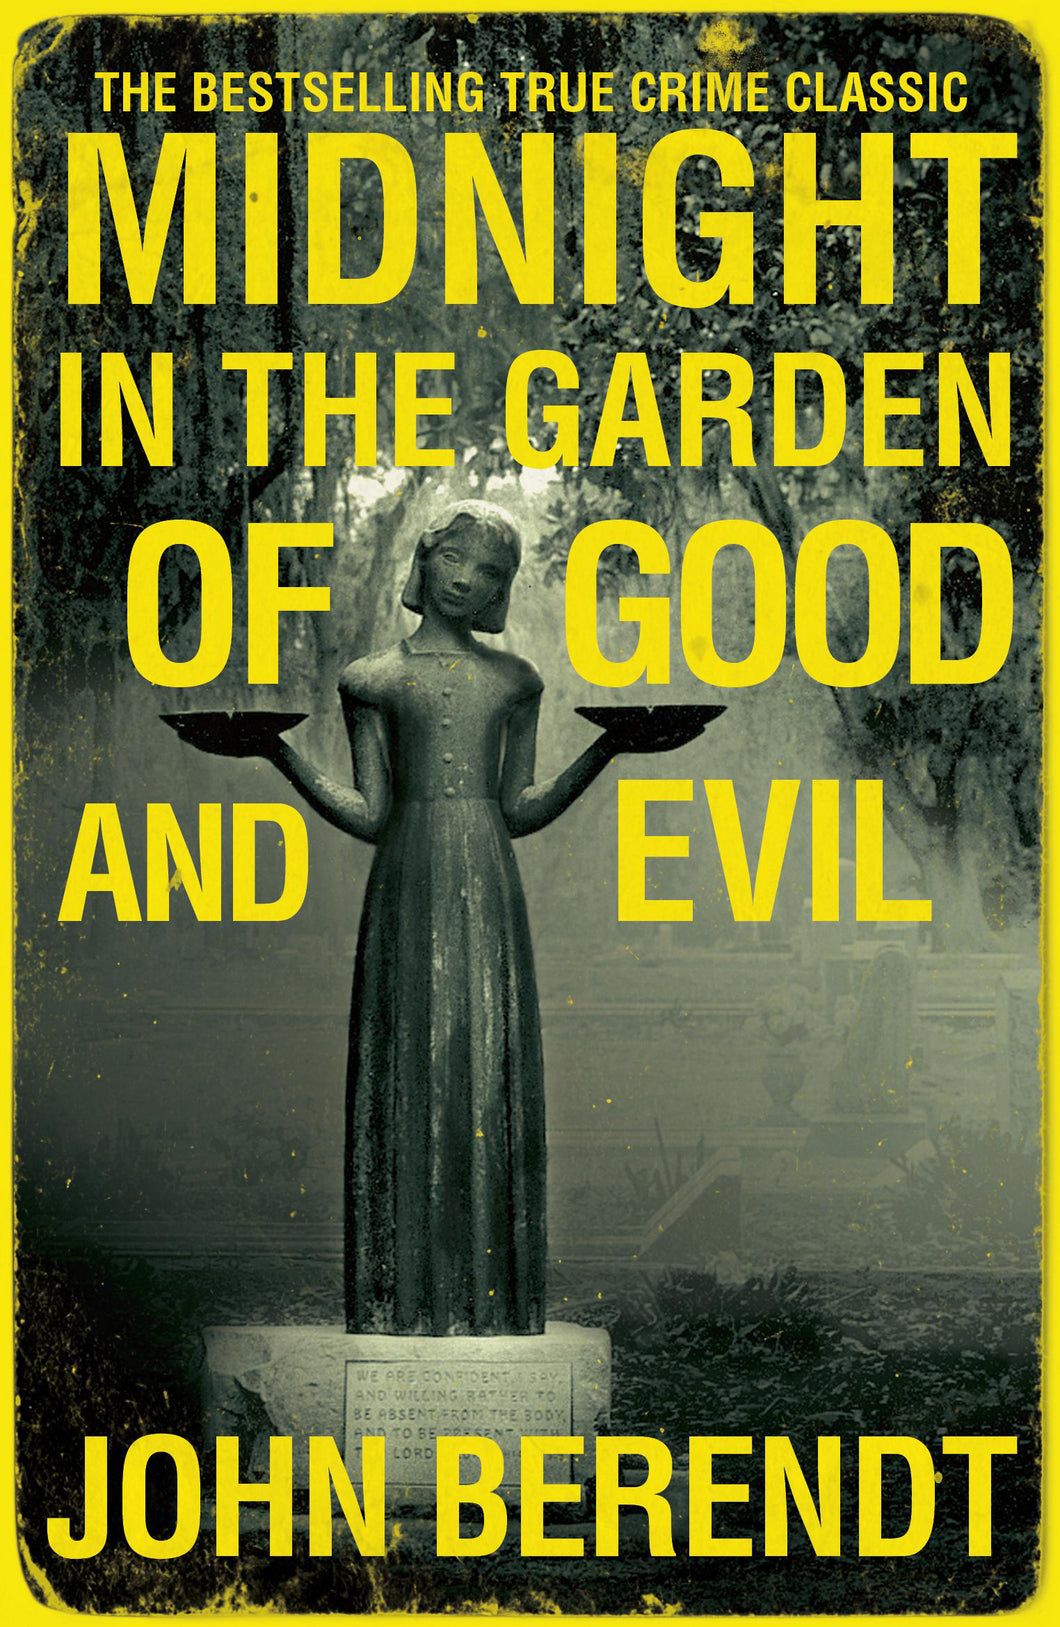 Midnight in the Garden of Good and Evil by John Berendt: stock image of front cover.